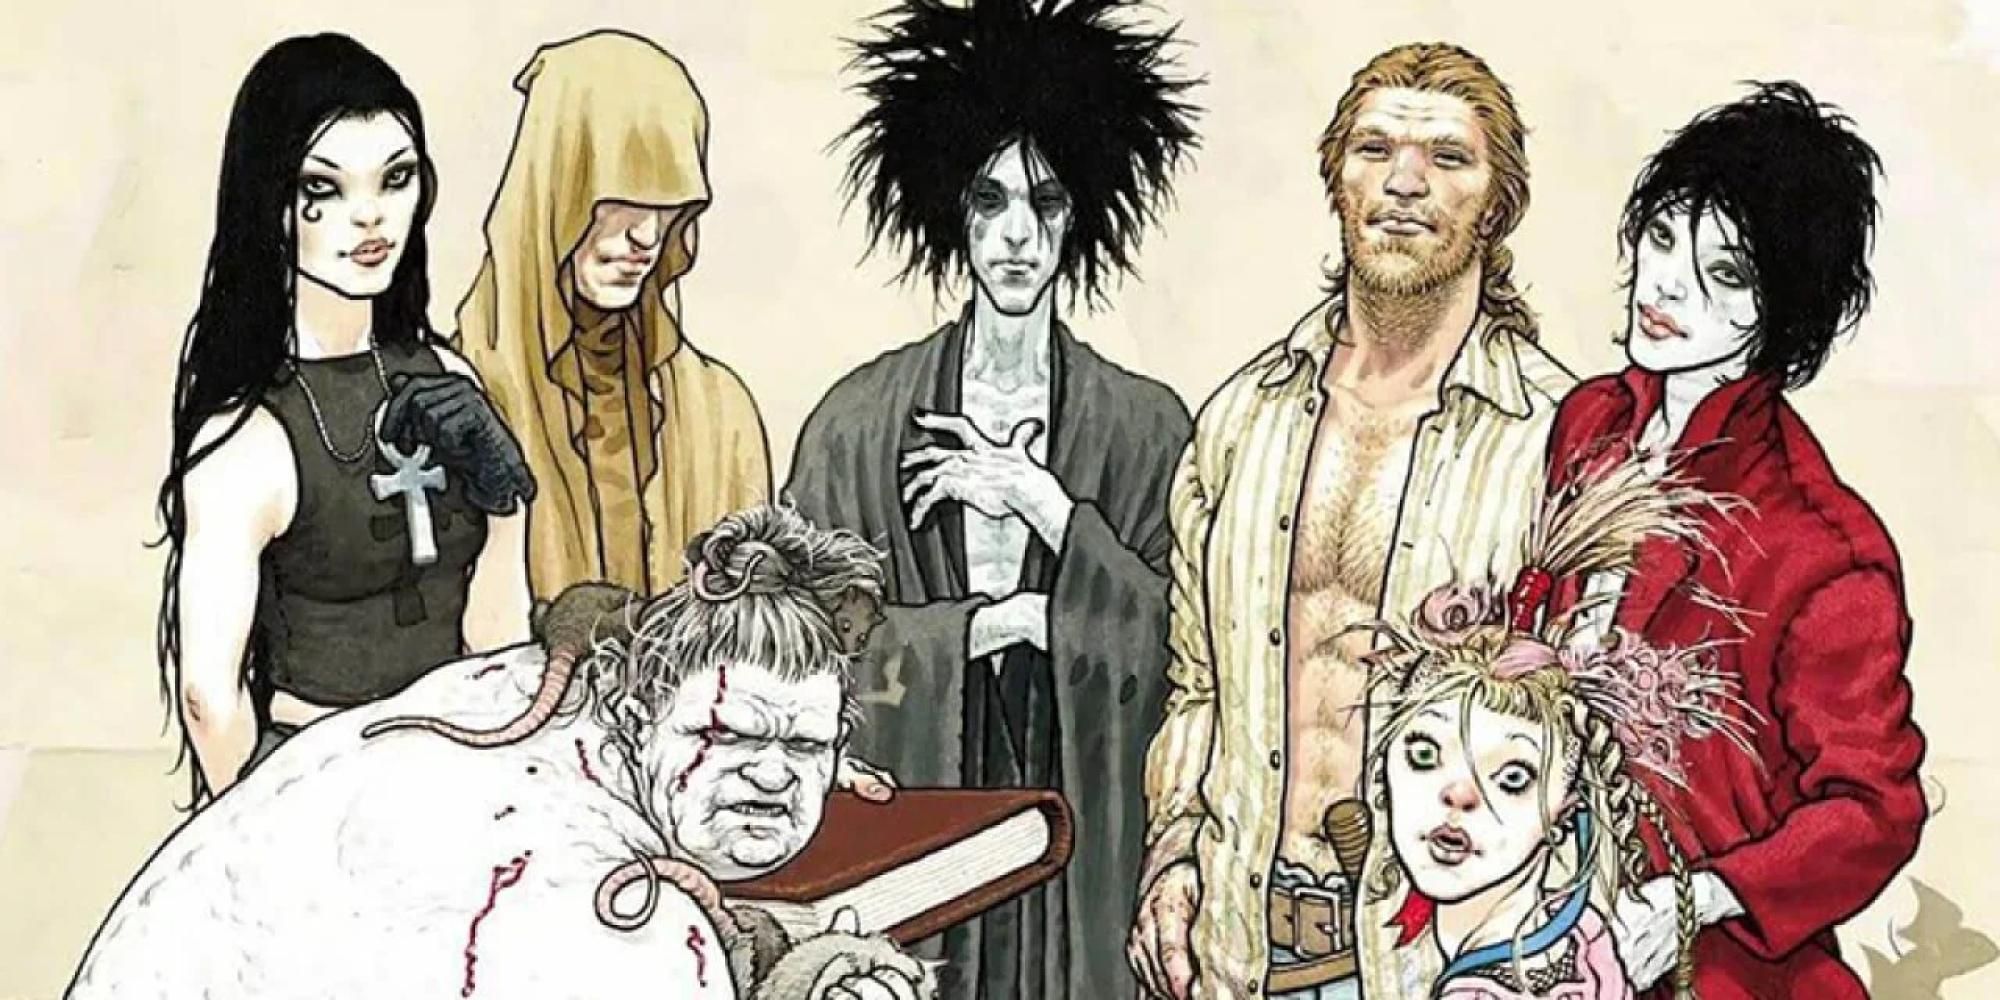 Characters from The Sandman